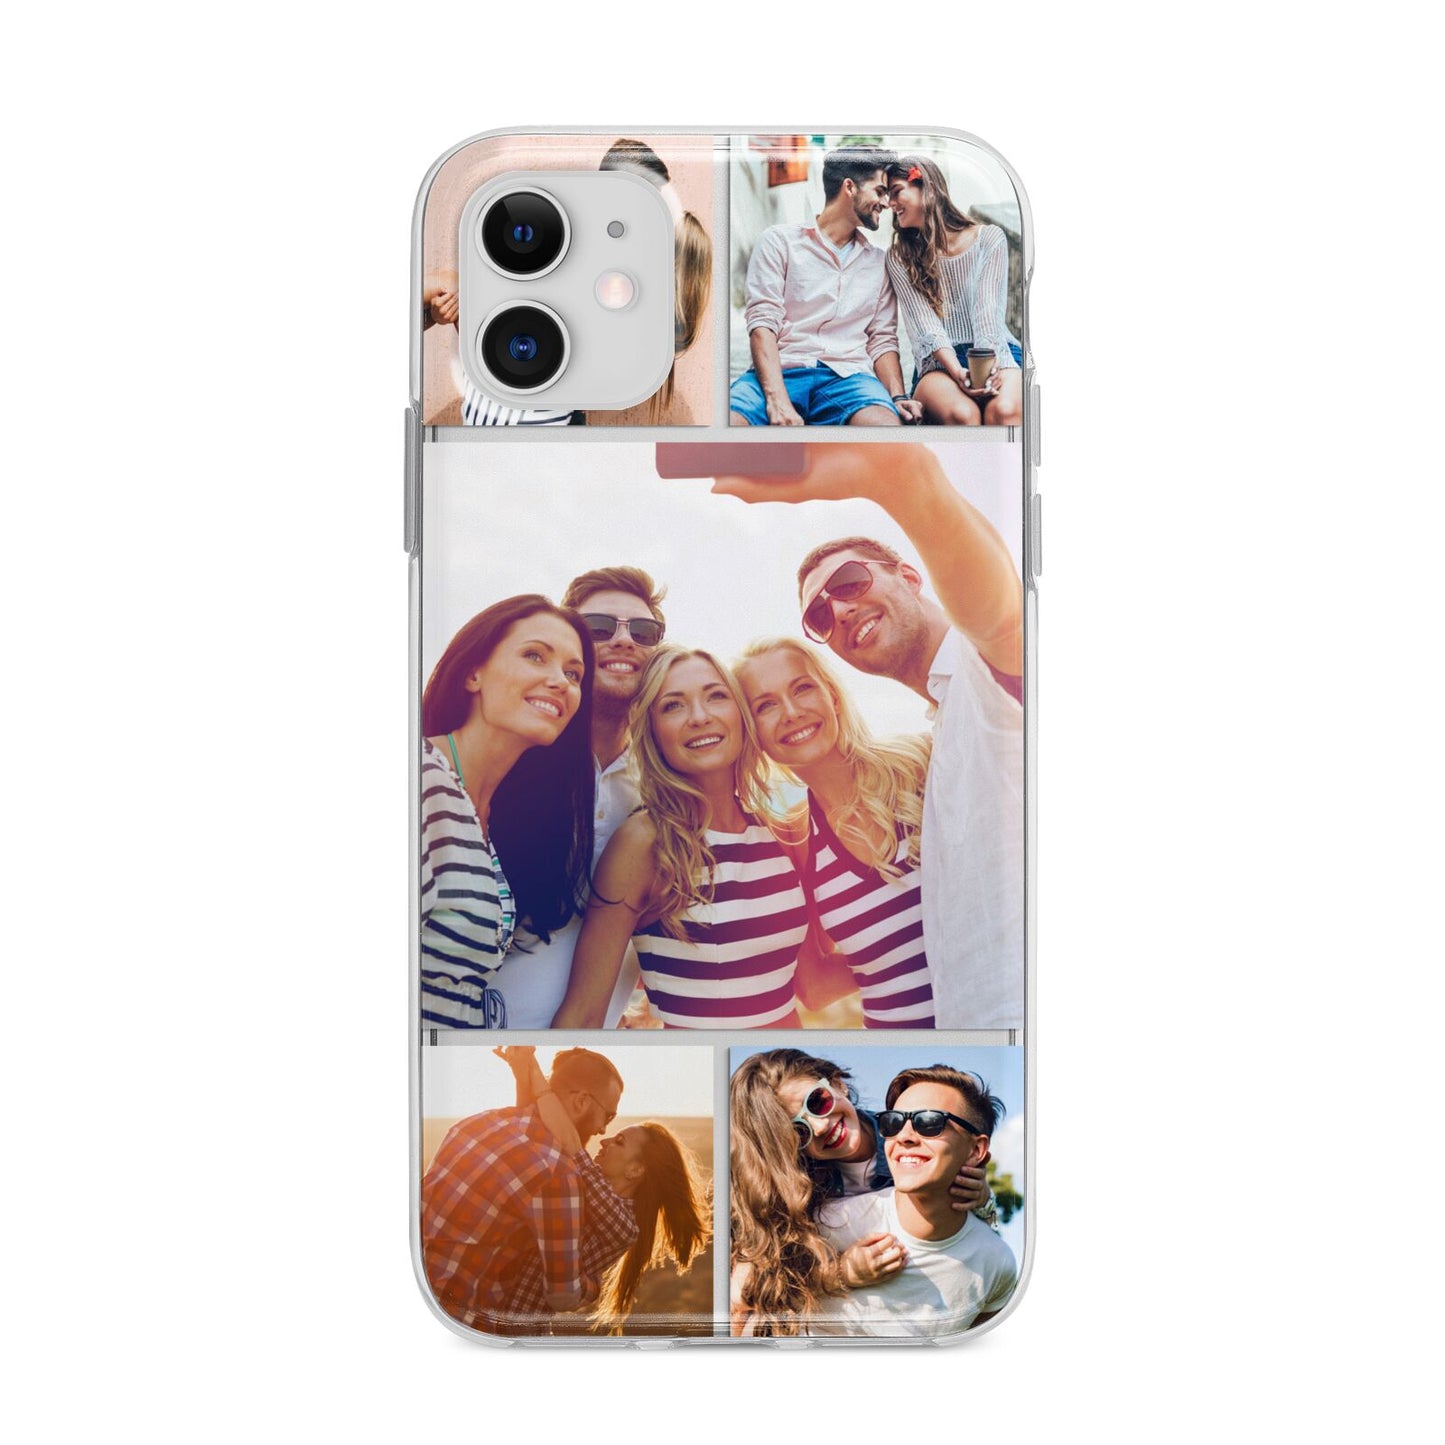 Tile Photo Collage Upload Apple iPhone 11 in White with Bumper Case